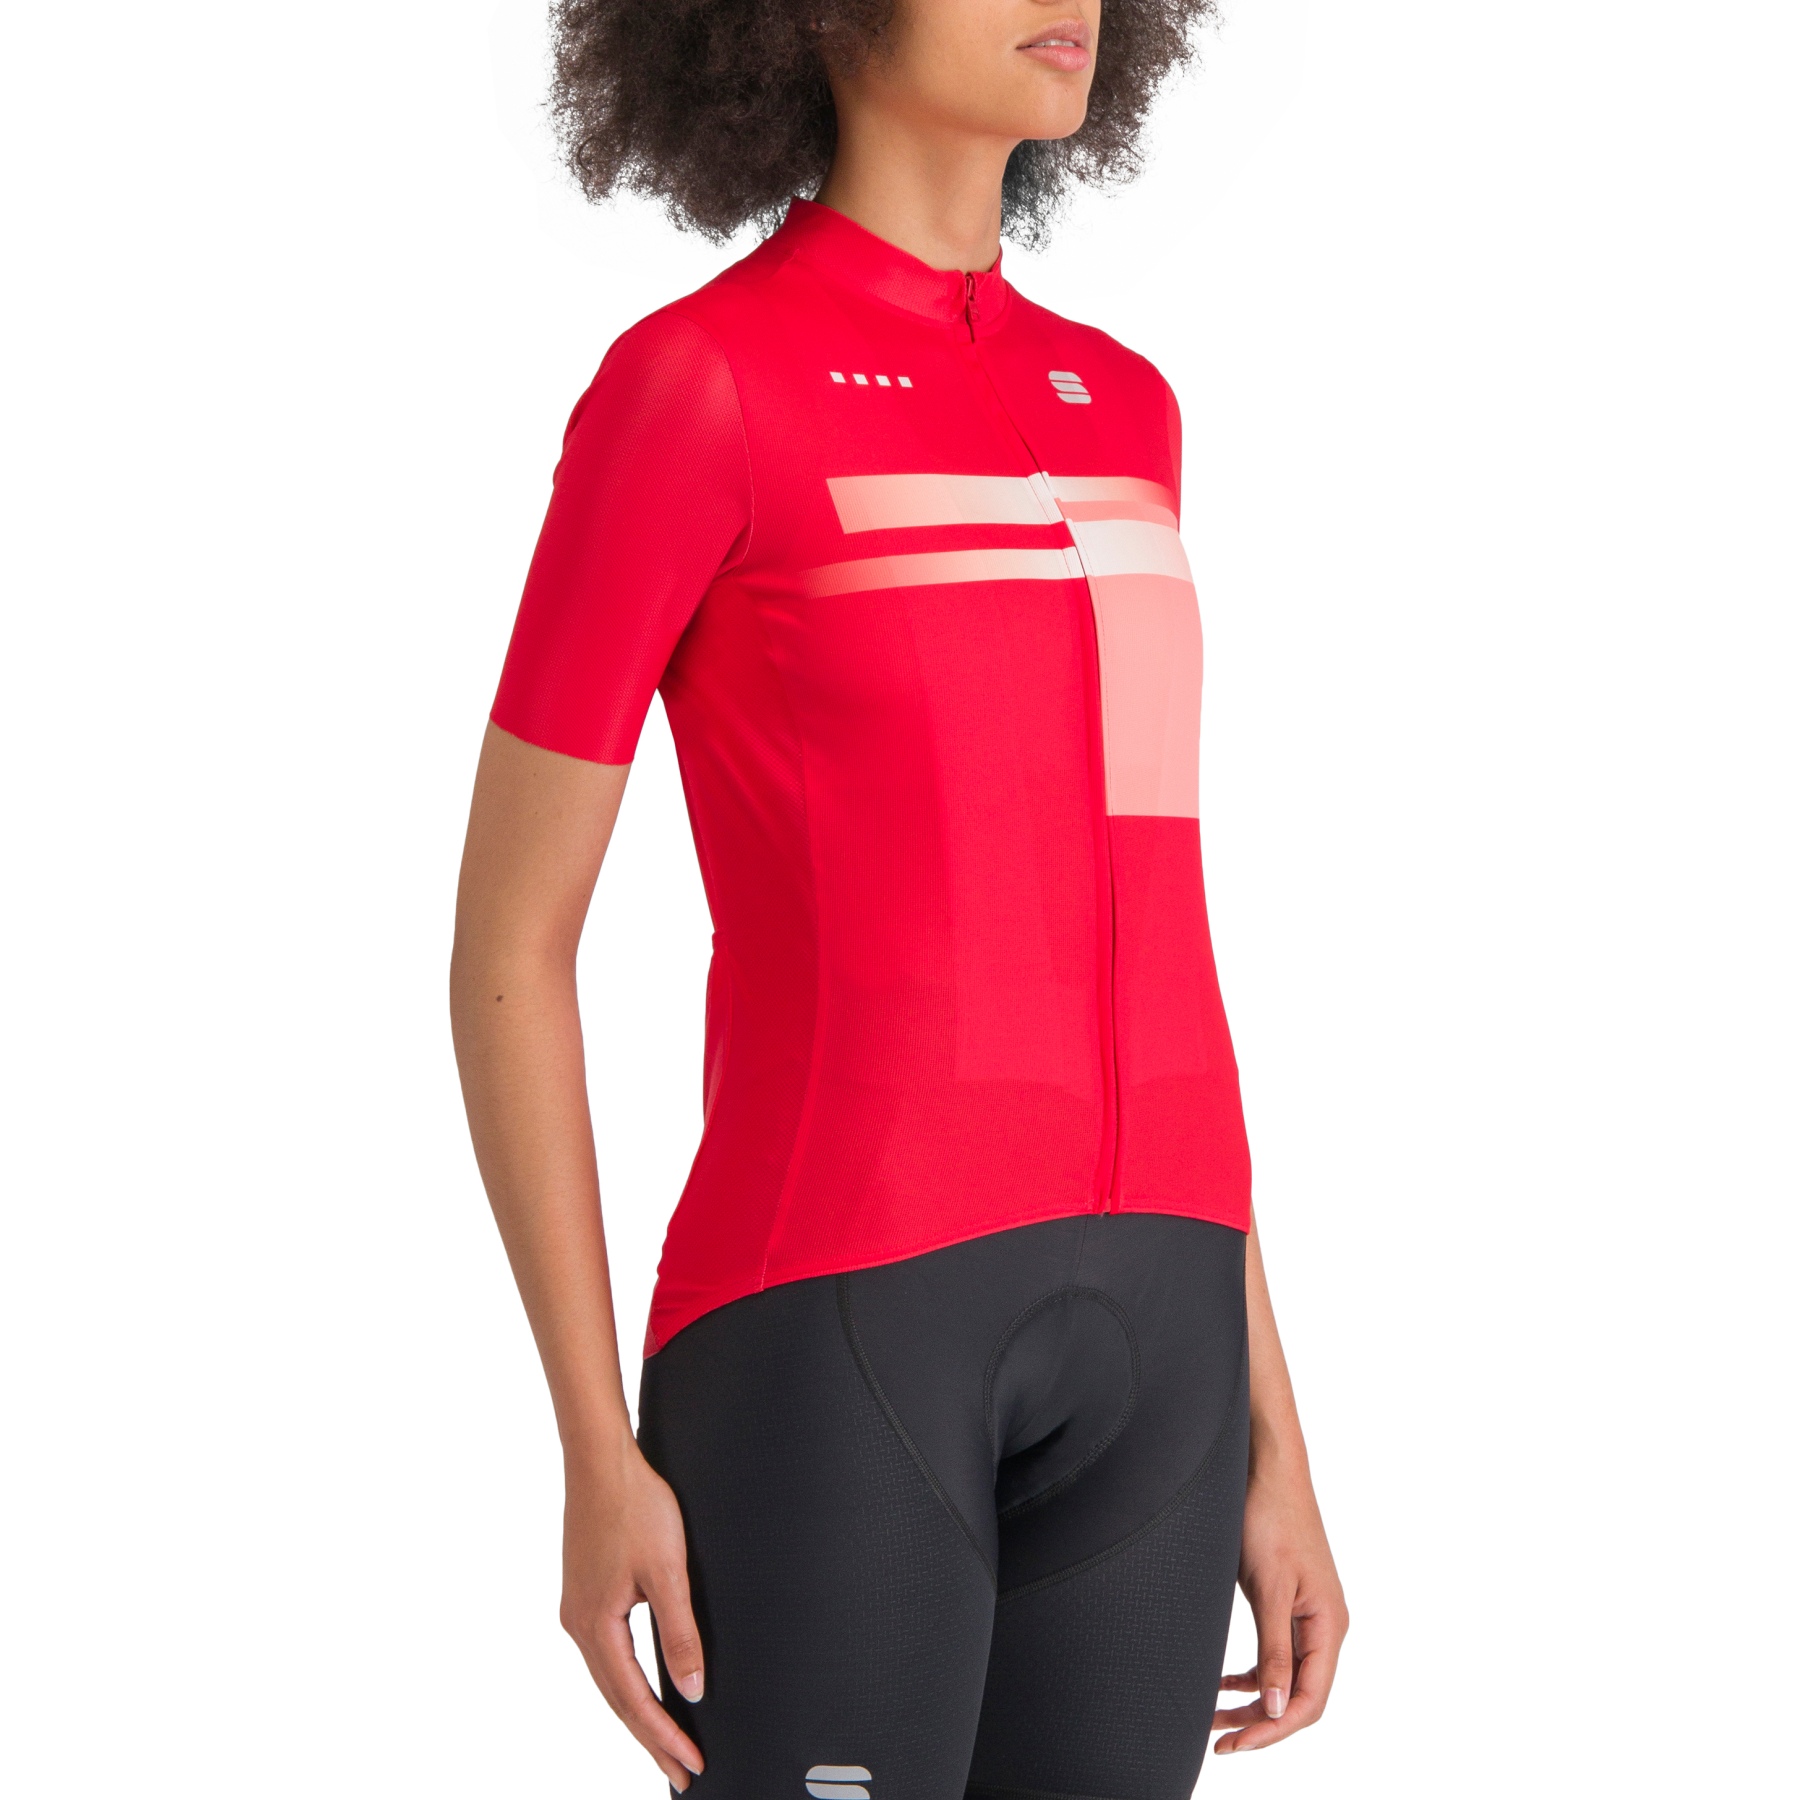 Picture of Sportful Gruppetto Jersey Women - 638 Tango Red Pink